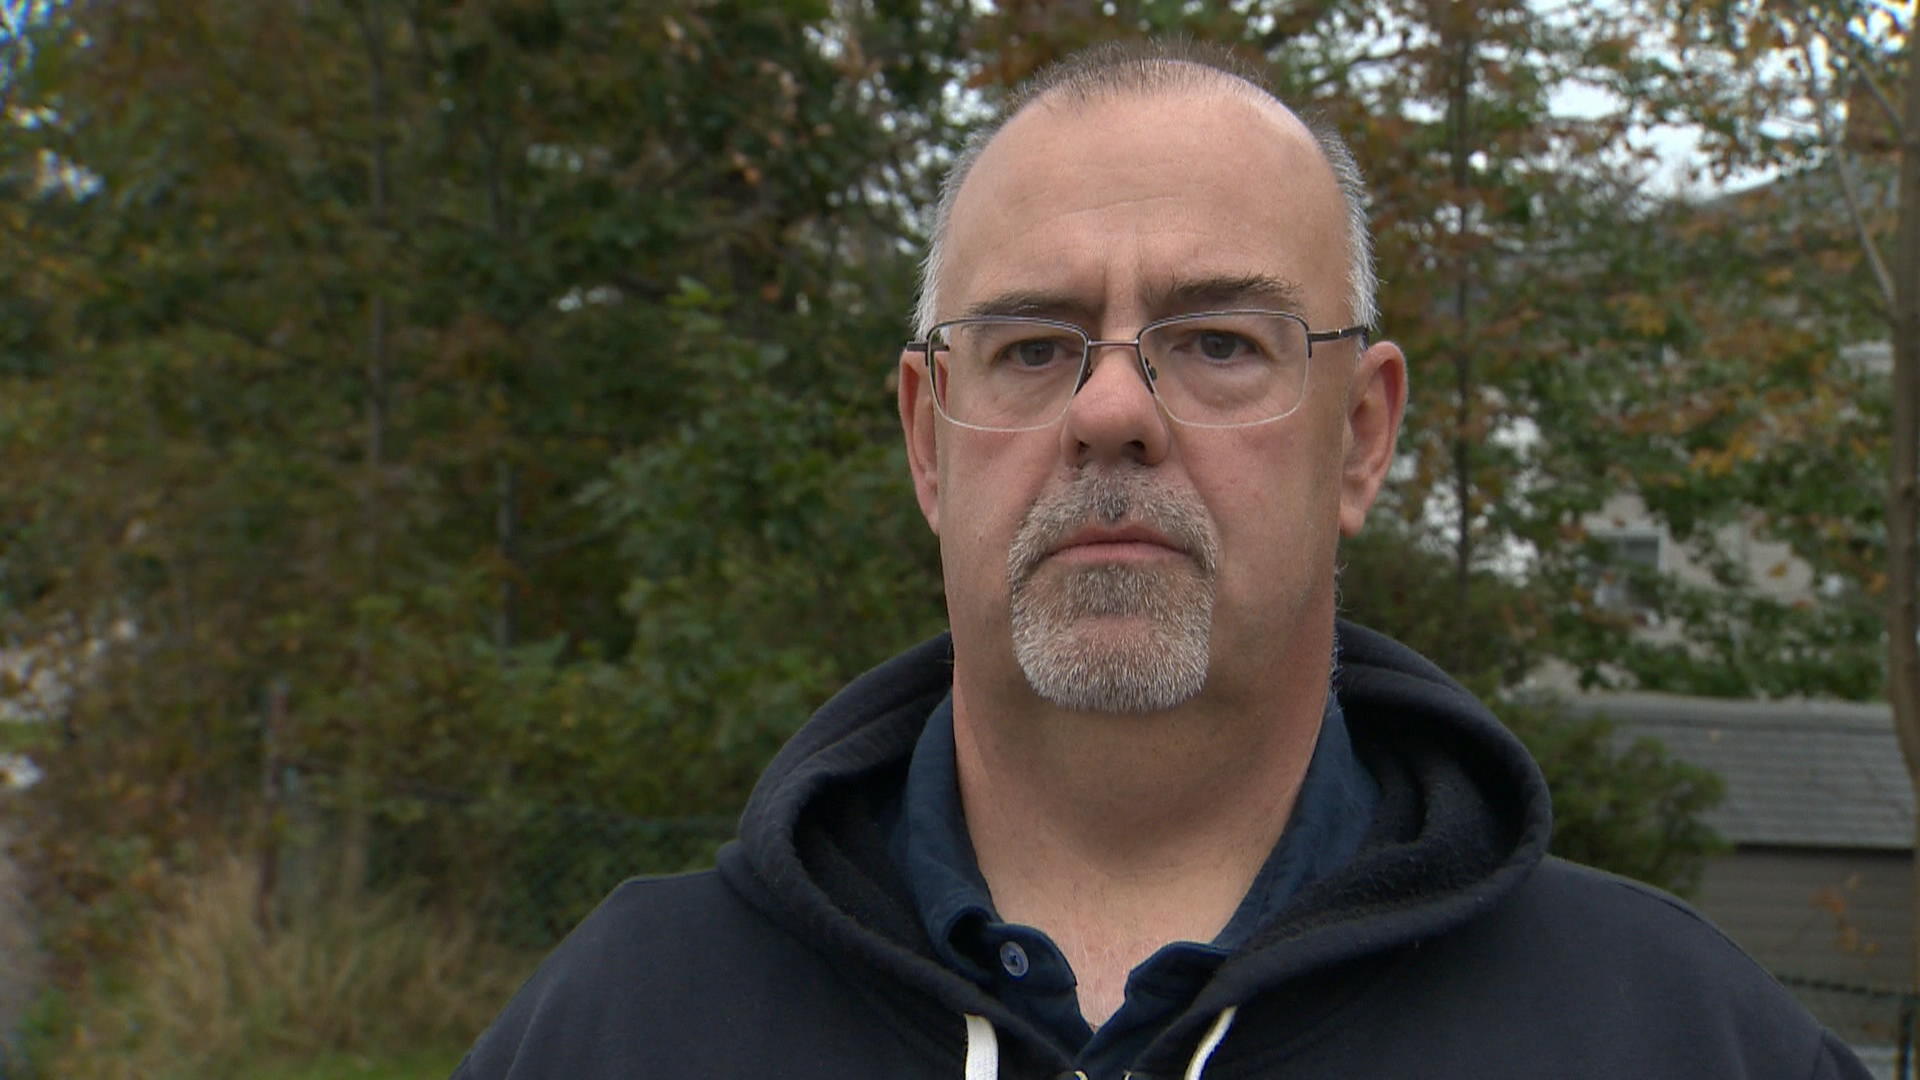 Halifax bus driver says staffing ‘stretched to the max’ as more routes get added